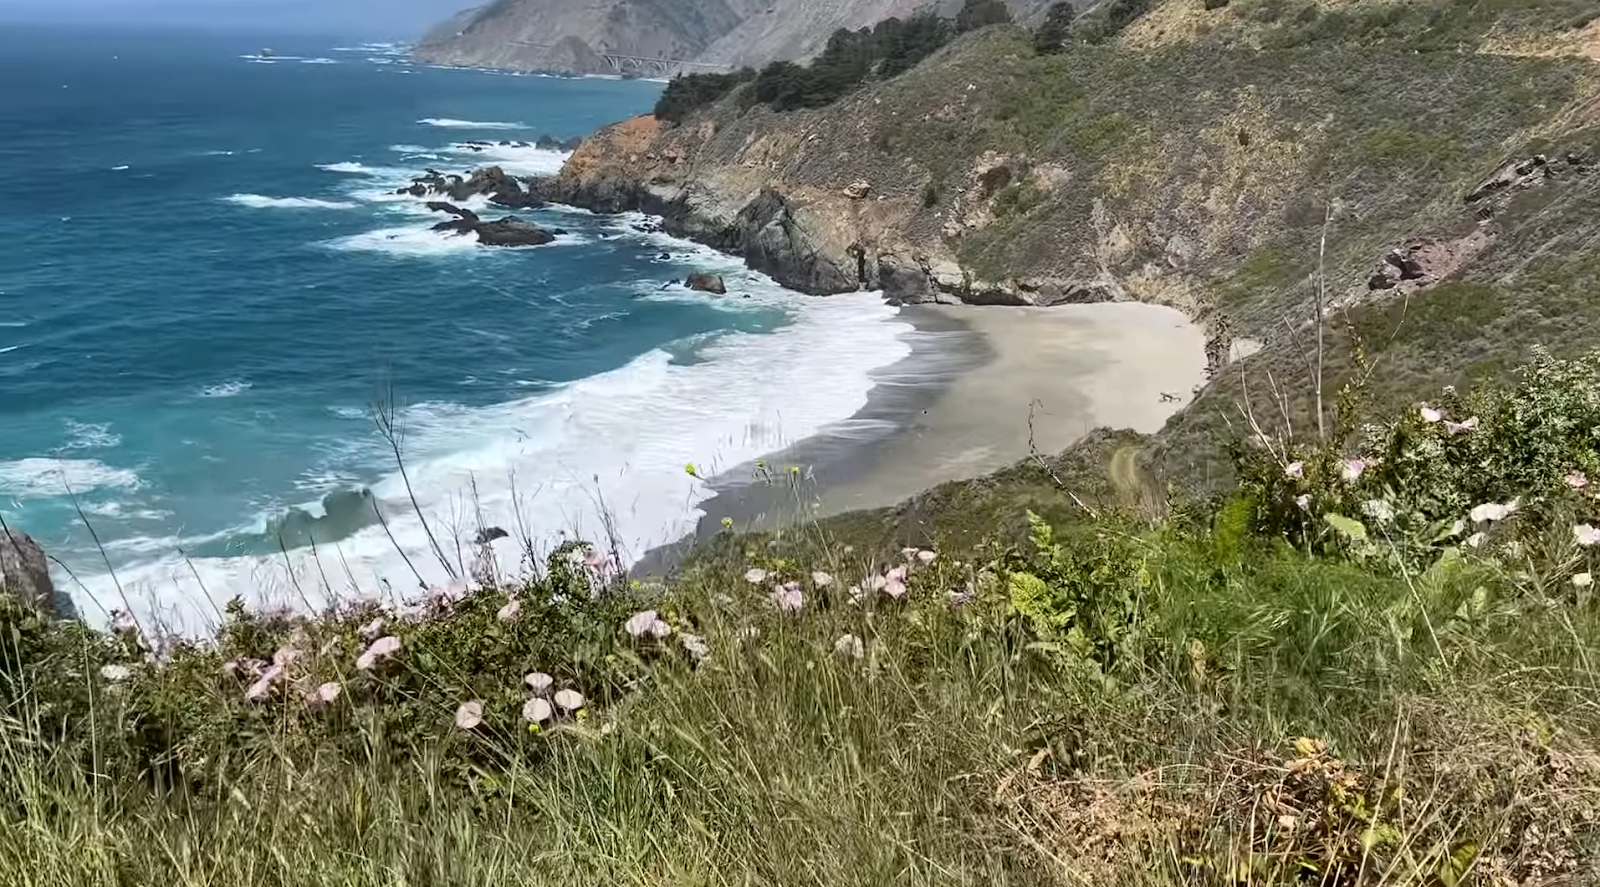 big sur- the coastline with beach and rocks, ocean with waves